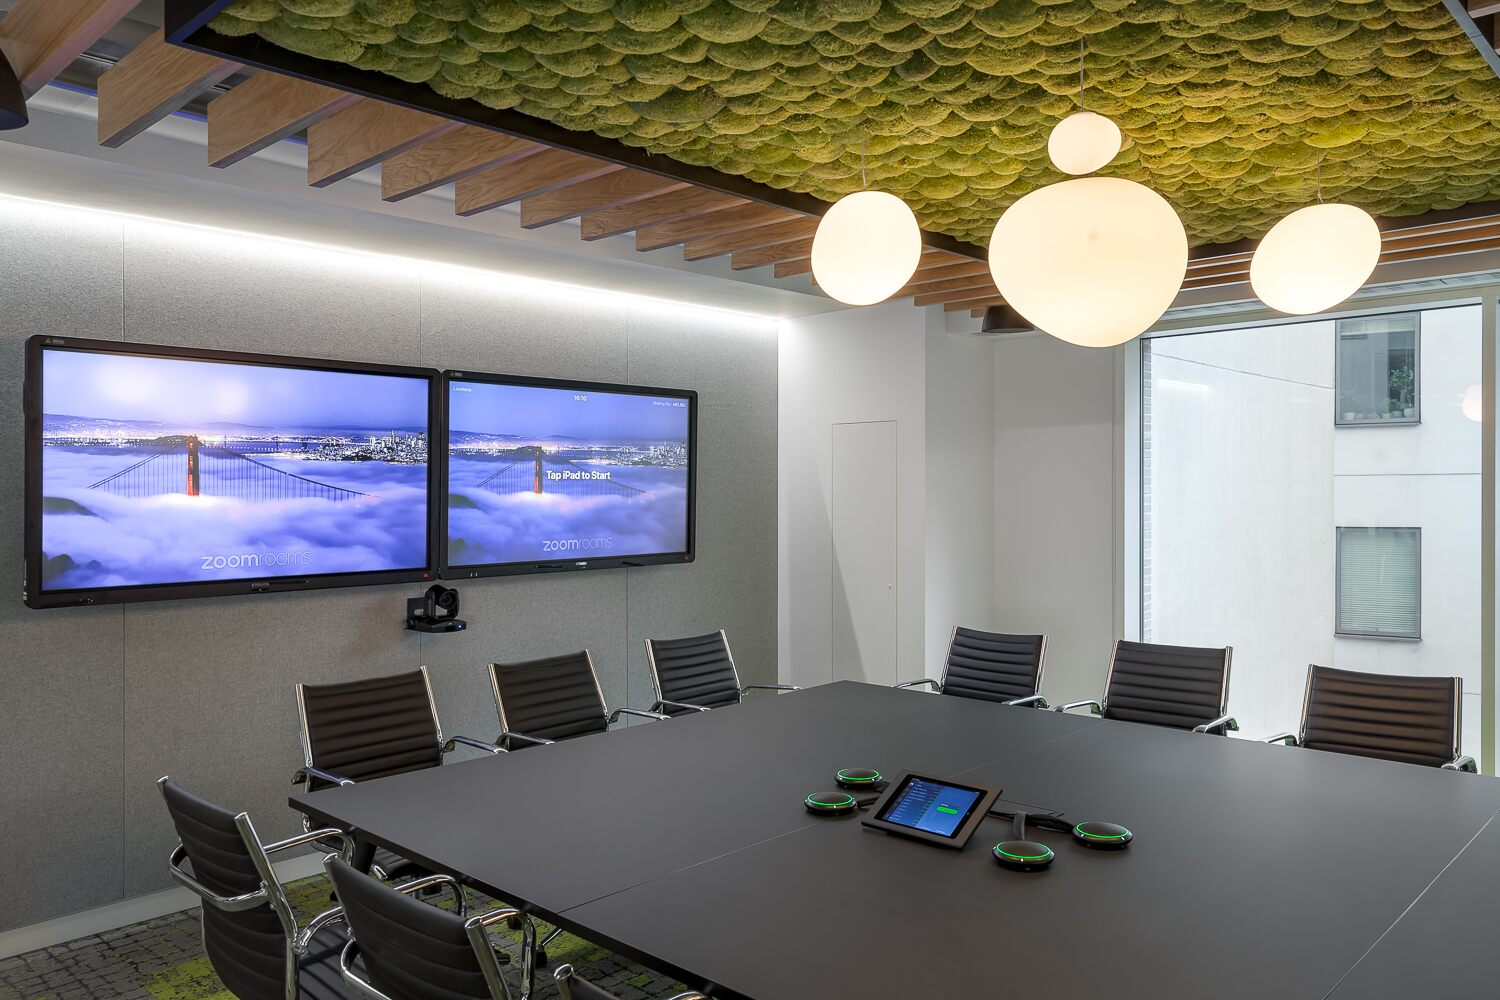 Moss ceilings at Oak North, designed and built by Tétris UK